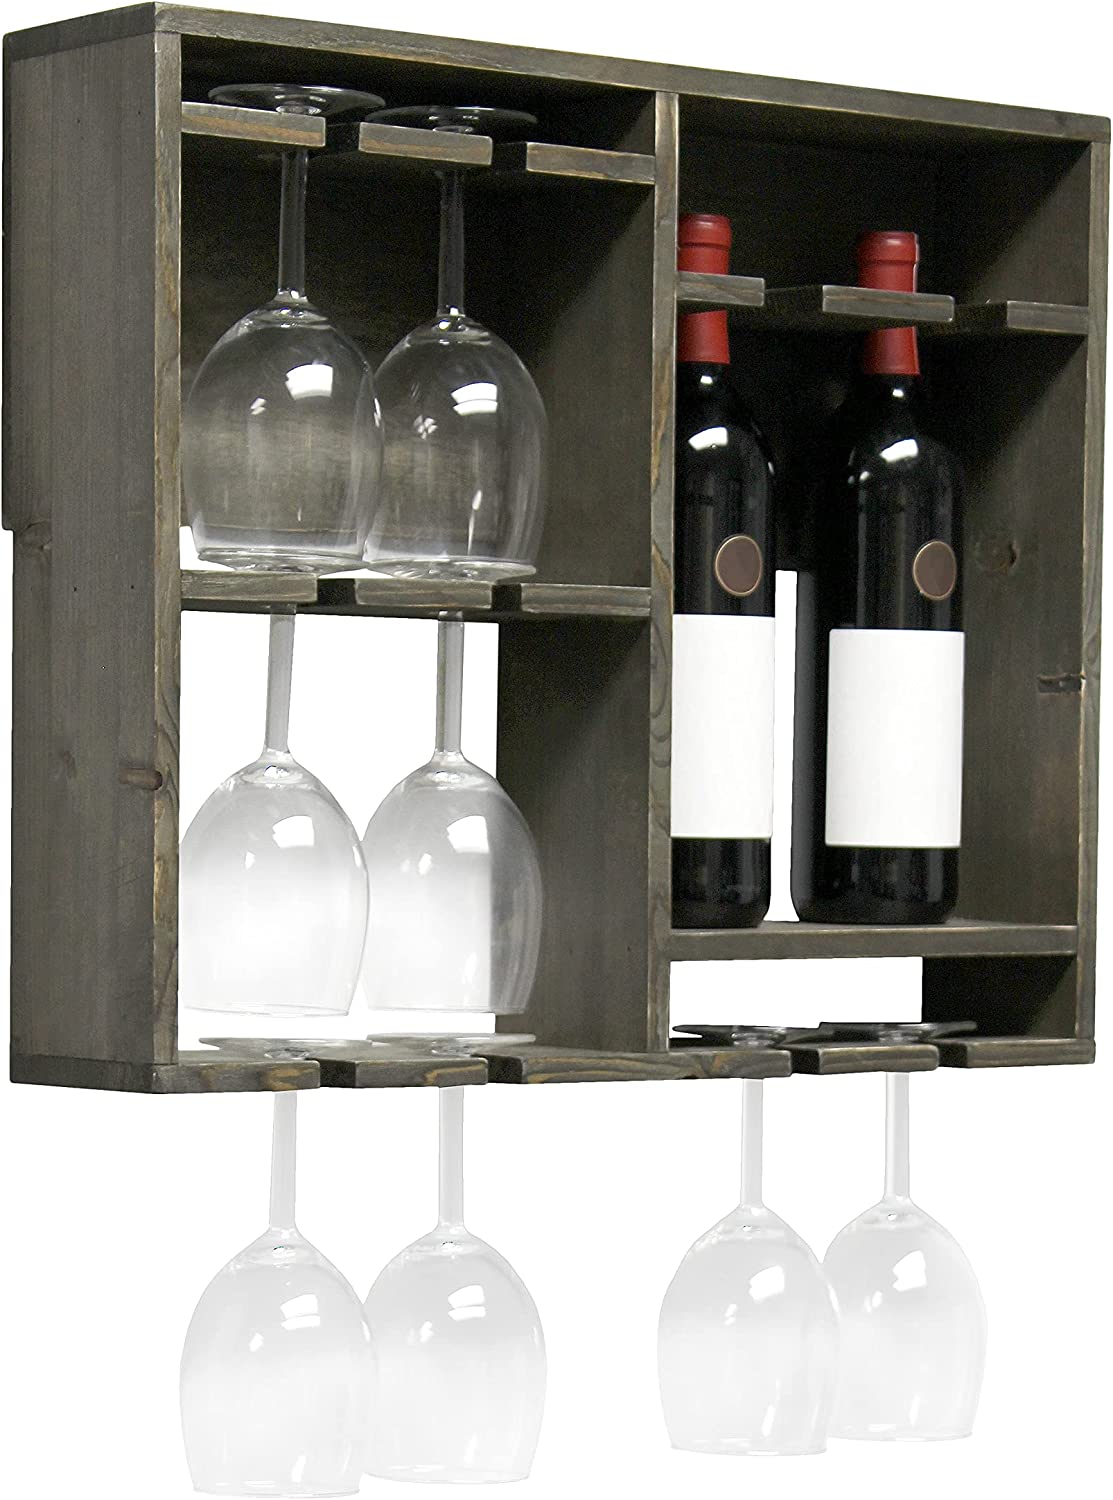 Elegant Designs HG1020-WWH Bartow Wood Shelf with Glass Holder Wall Mounted Wine Rack, White Wash